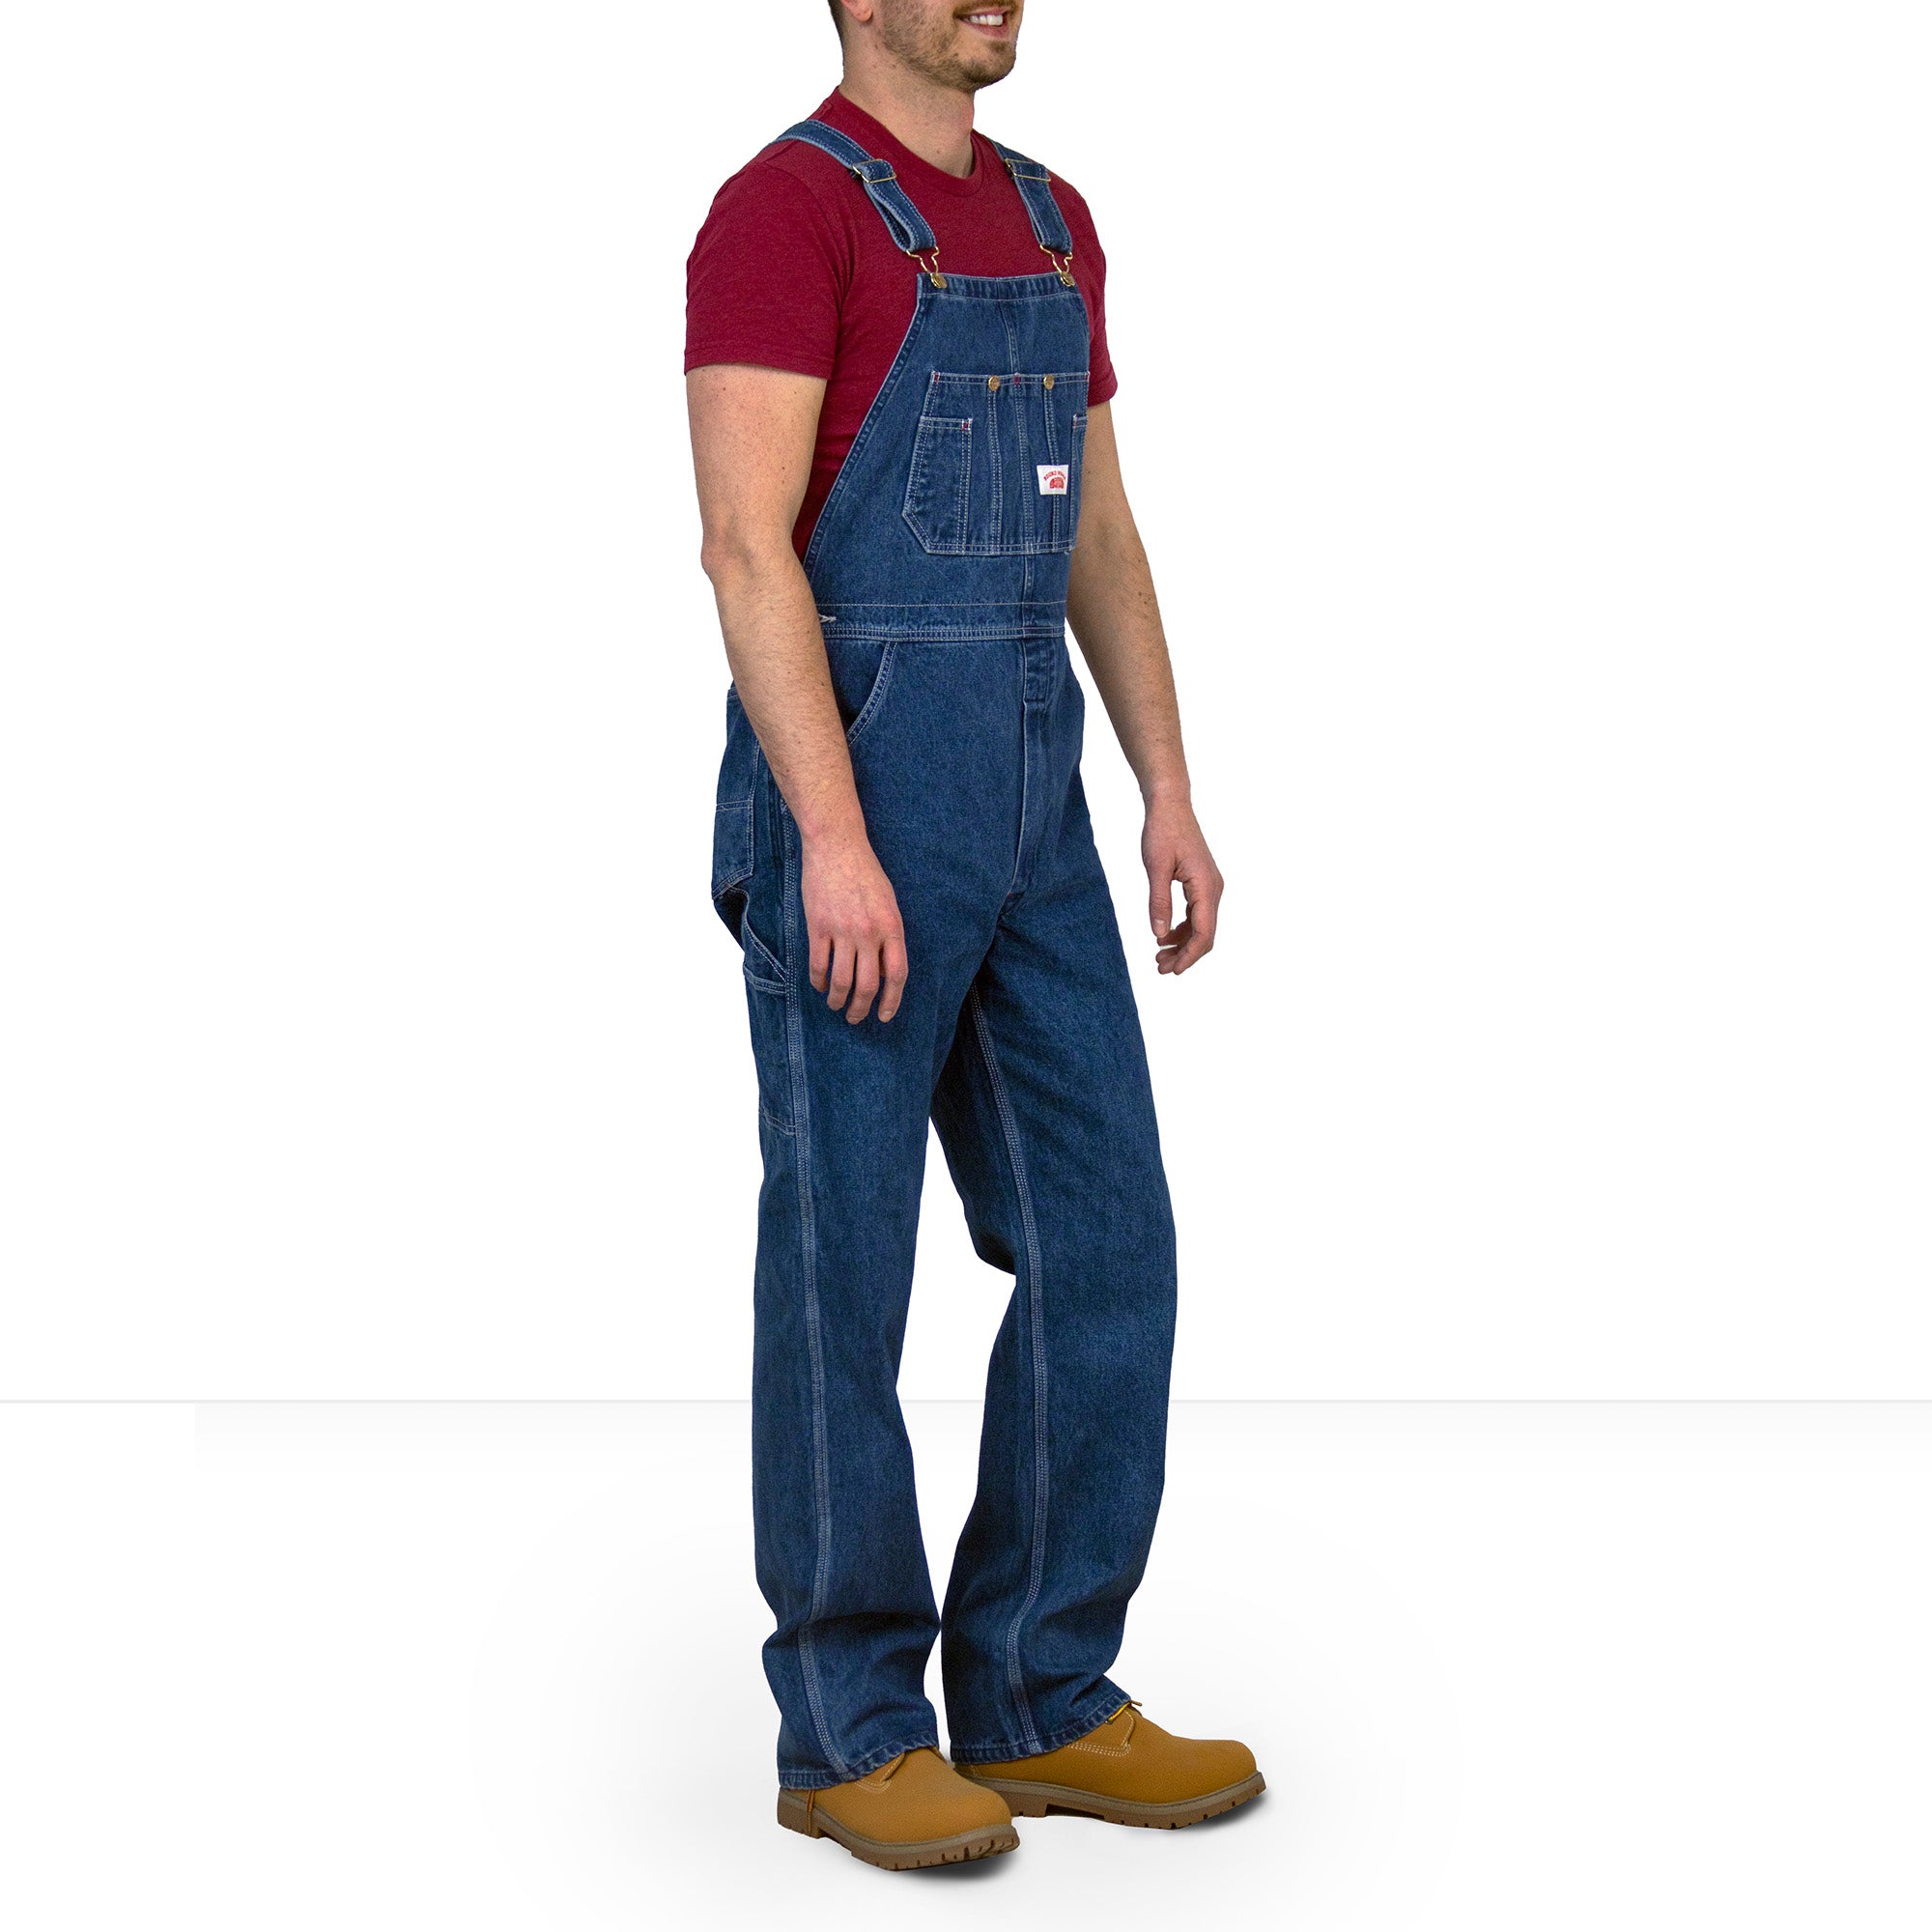 699 Round House Made in USA Stone Washed Blue Denim Overalls – Round House  American Made Jeans Made in USA Overalls, Workwear